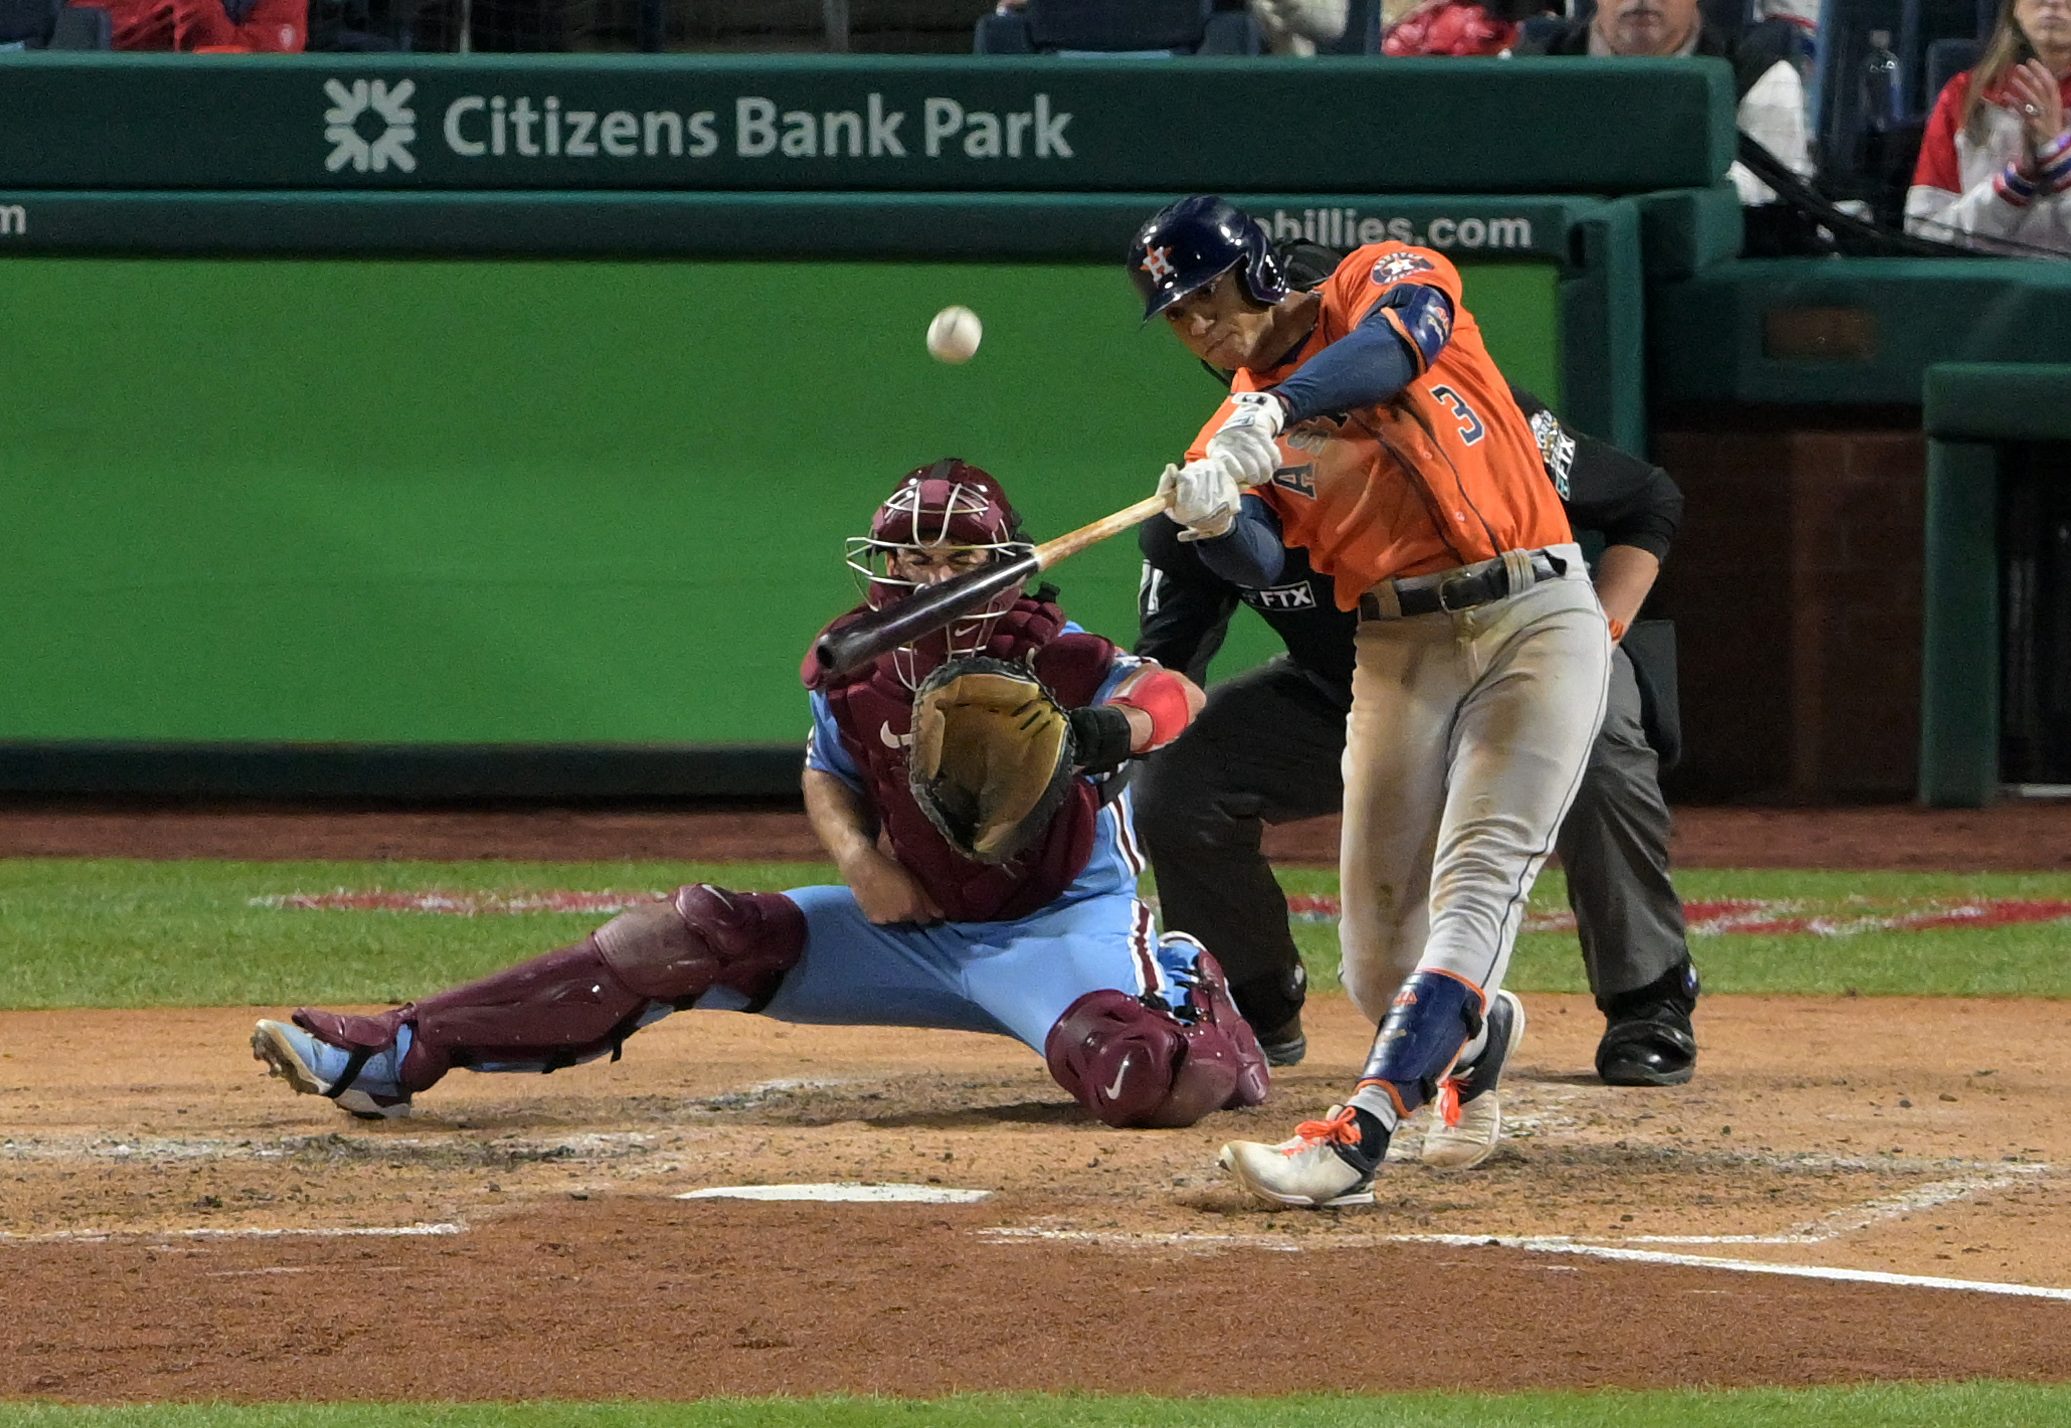 Astros lead Phillies 3-2 after World Series game 5 win